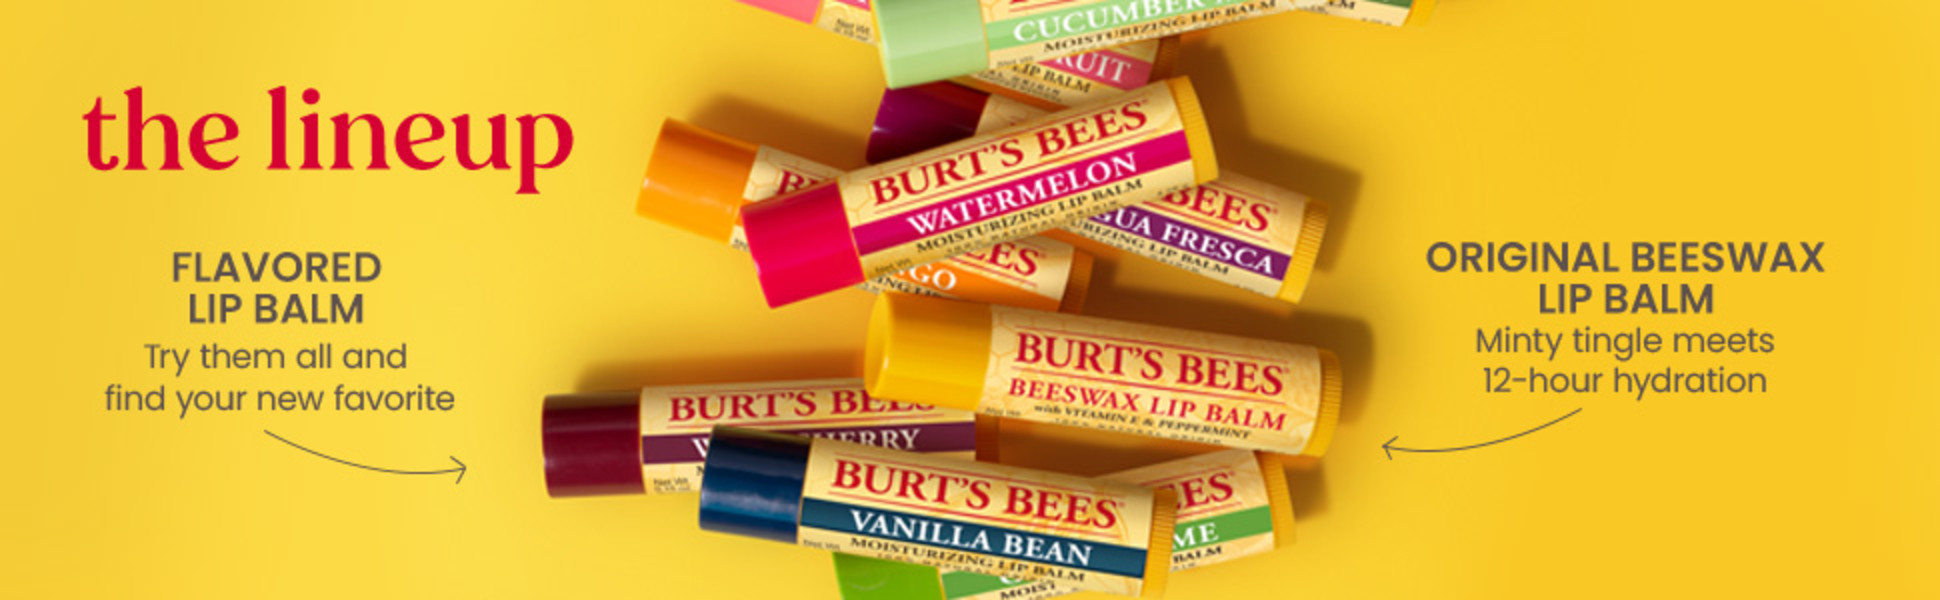 Bert’s bees beeswax lip balm with vitamin E and Pepp’rmint